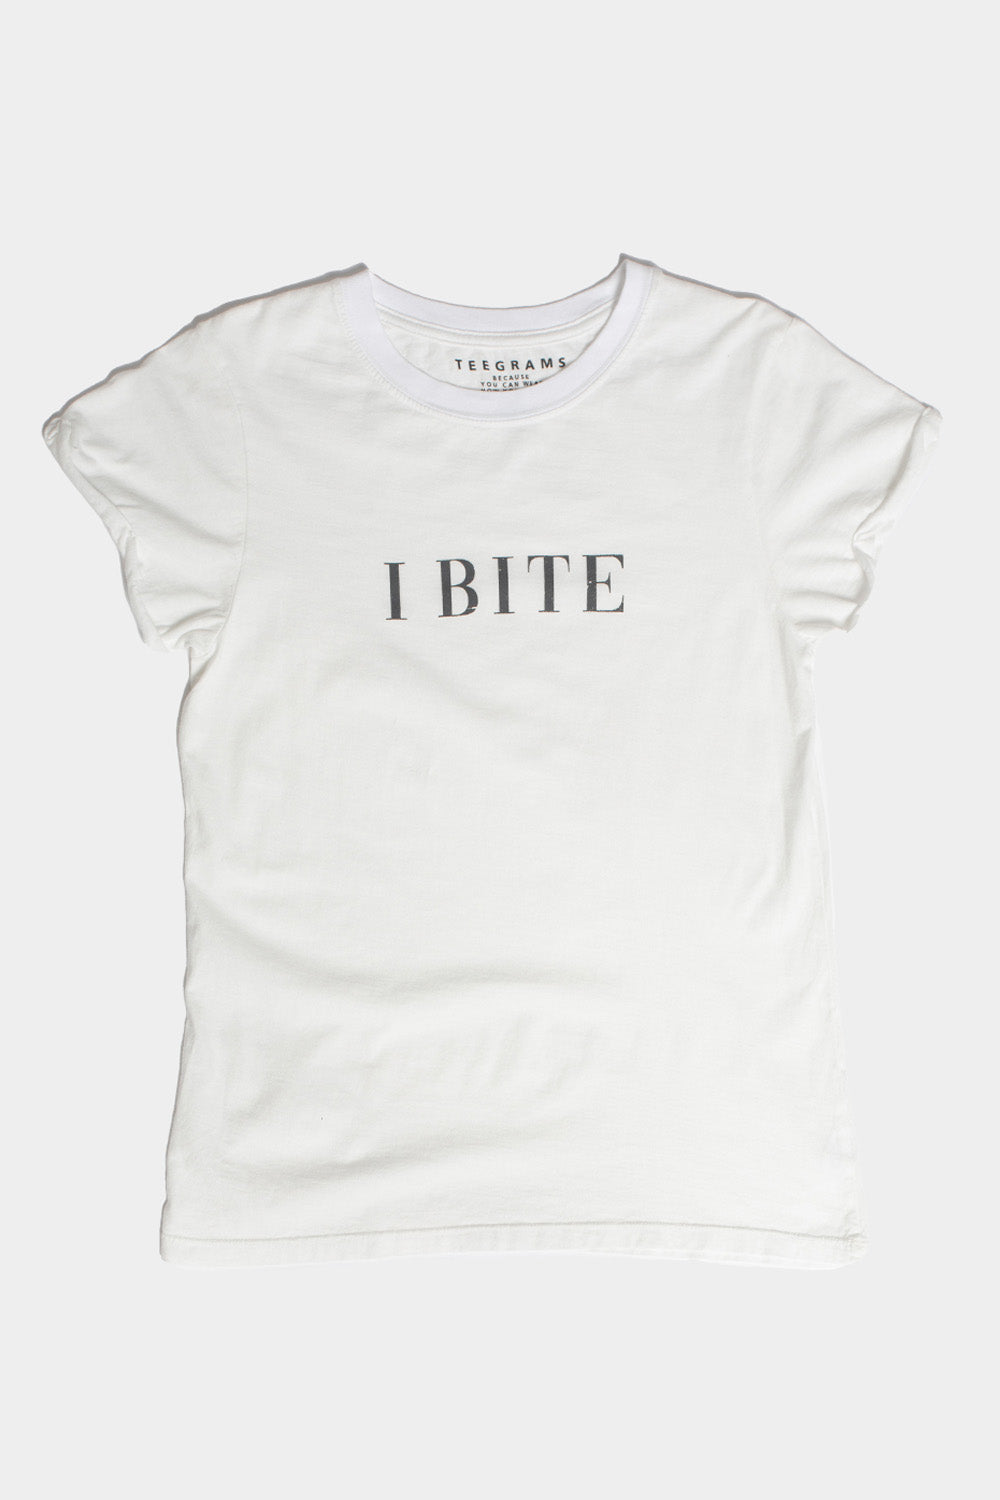 I Bite White Fitted Tee